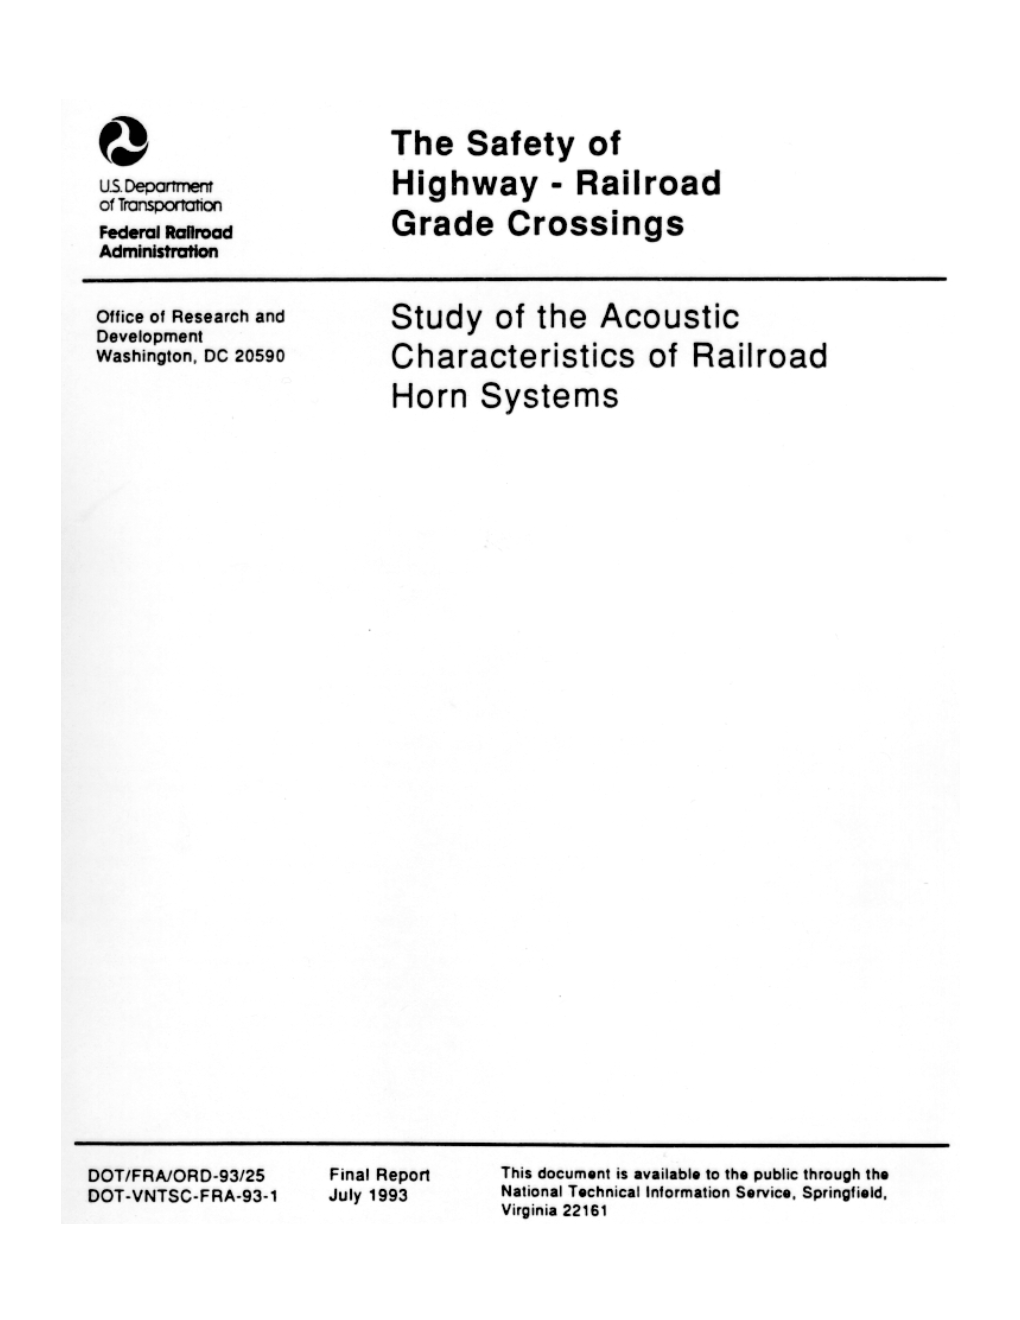 Study of the Acoustic Characteristics of Railroad Horn Systems RR397/R3022 6